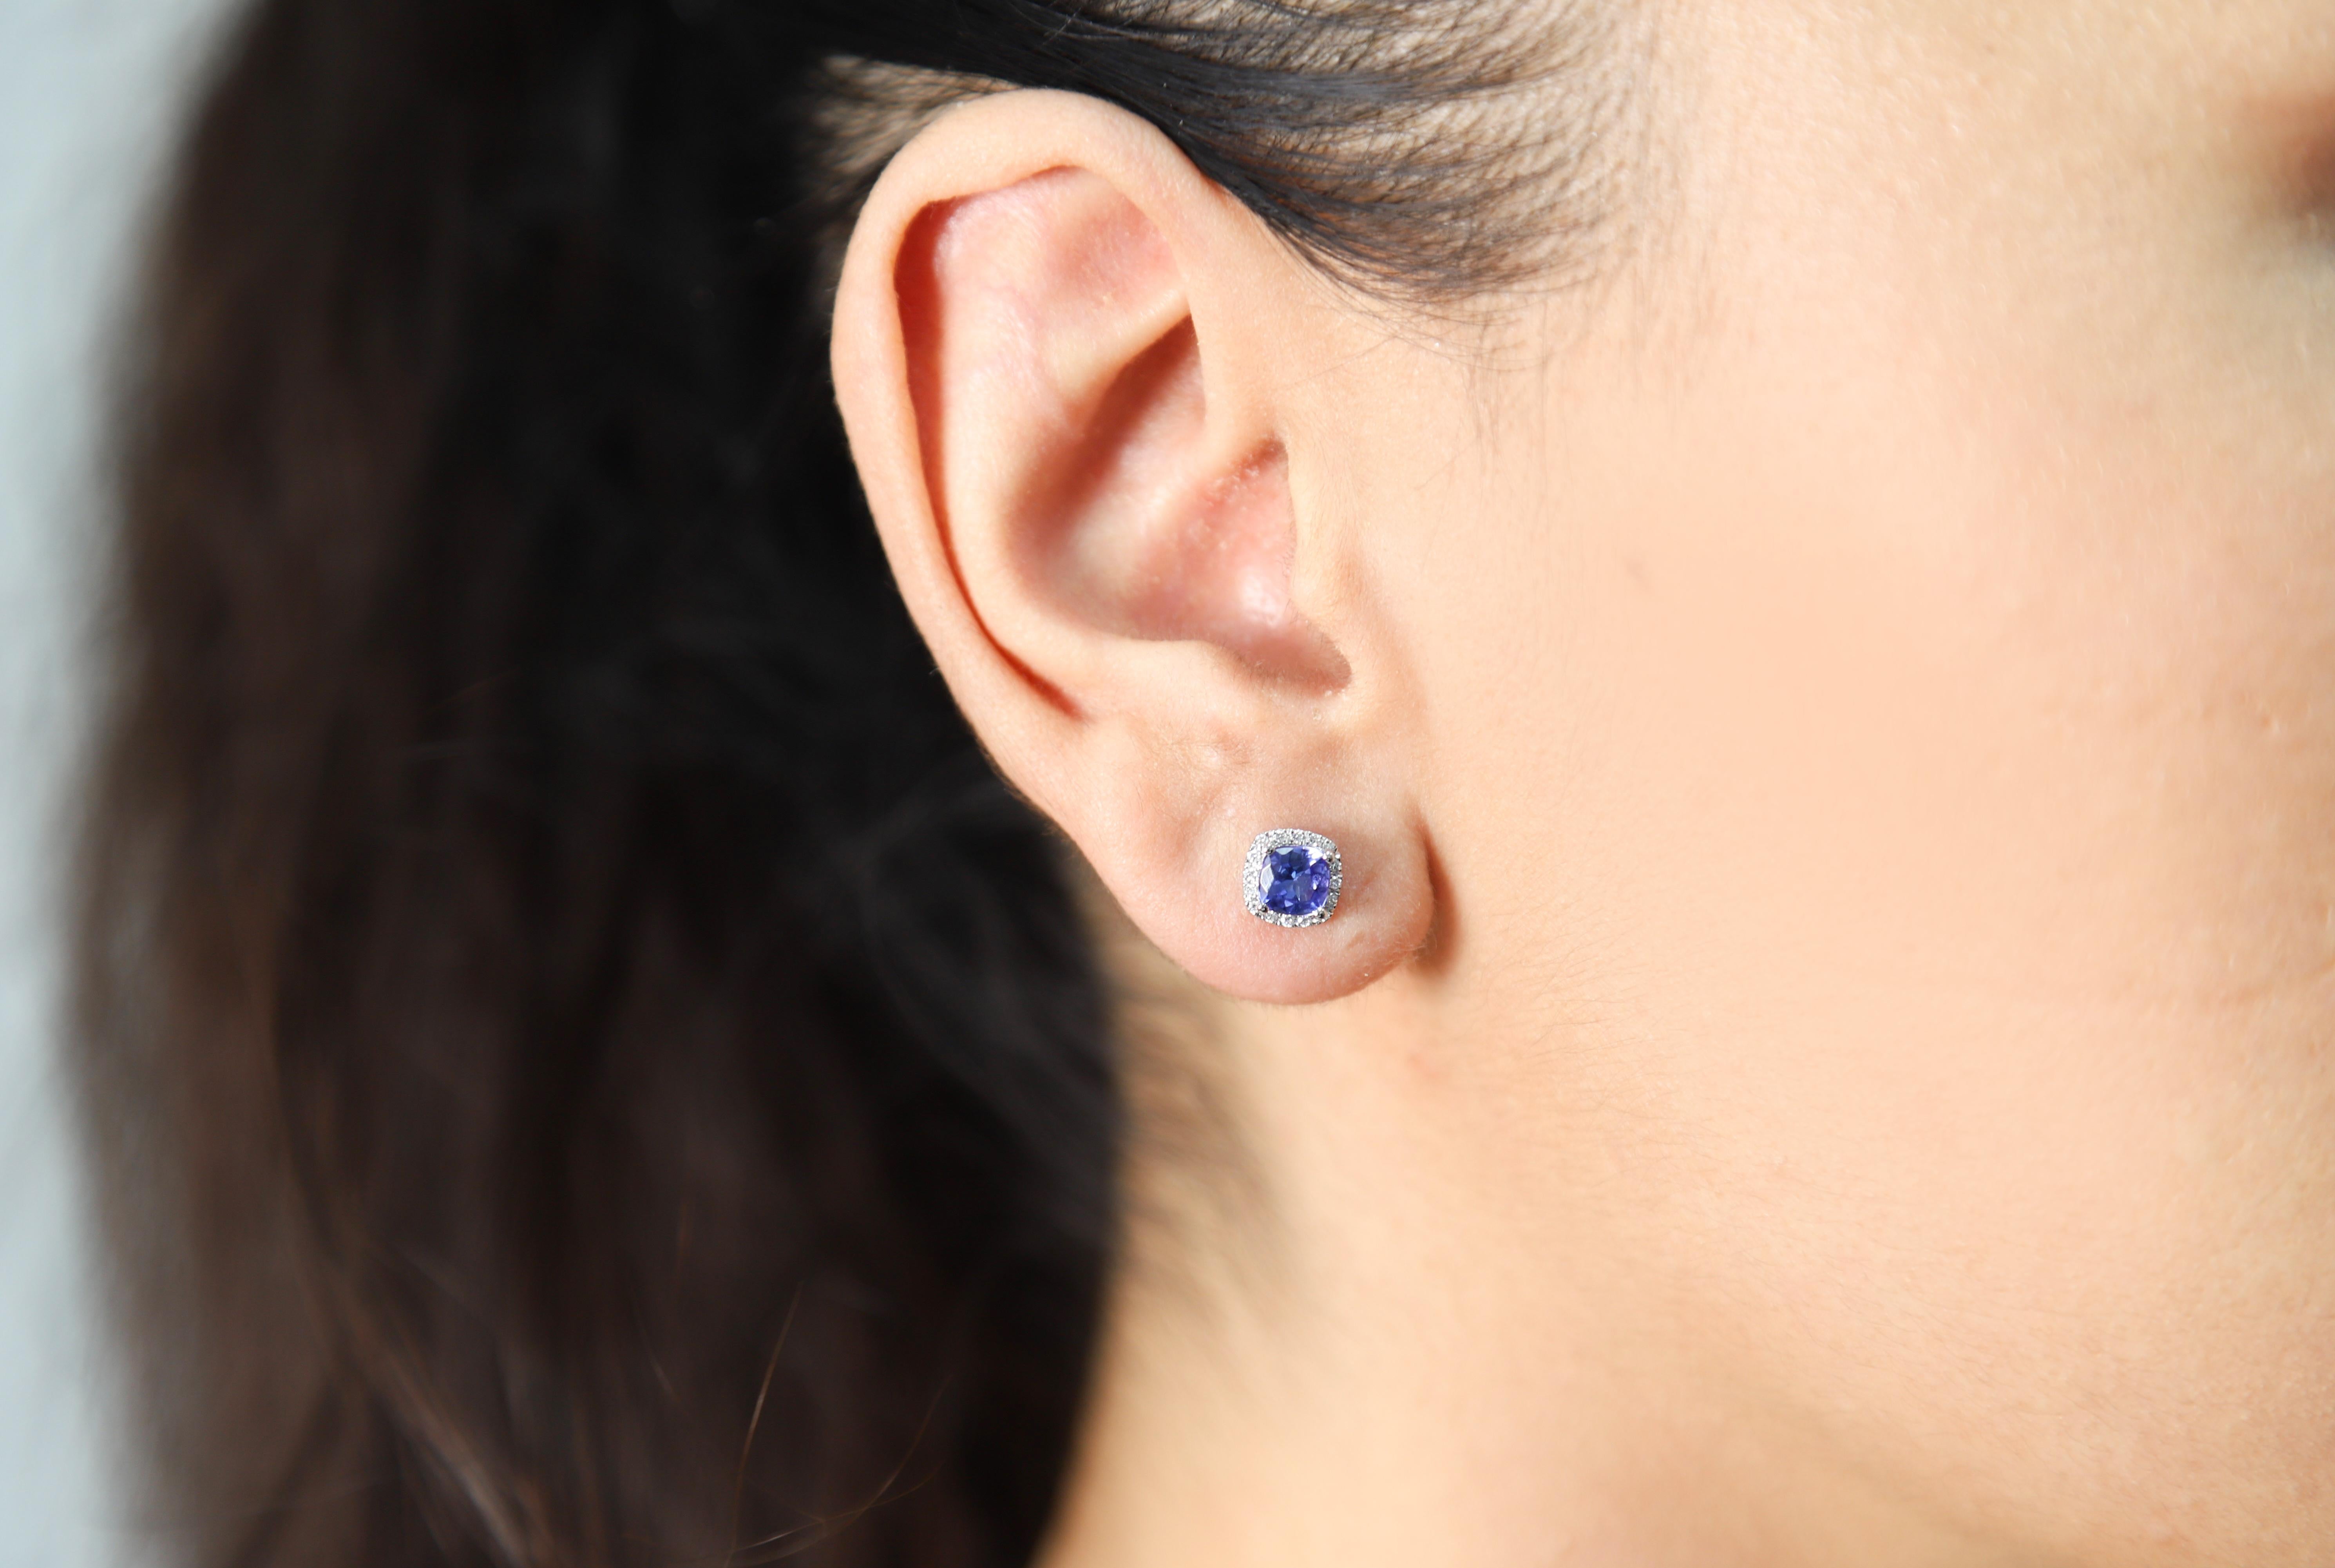 Decorate yourself in elegance with this Earring is crafted from 14-karat White Gold by Gin & Grace Earring. This Earring is made up of 5.0 mm Cushion-cut (2 pcs) 1.22 carat Tanzanite and Round-cut White Diamond (32 pcs) 0.11 carat. This Earring is